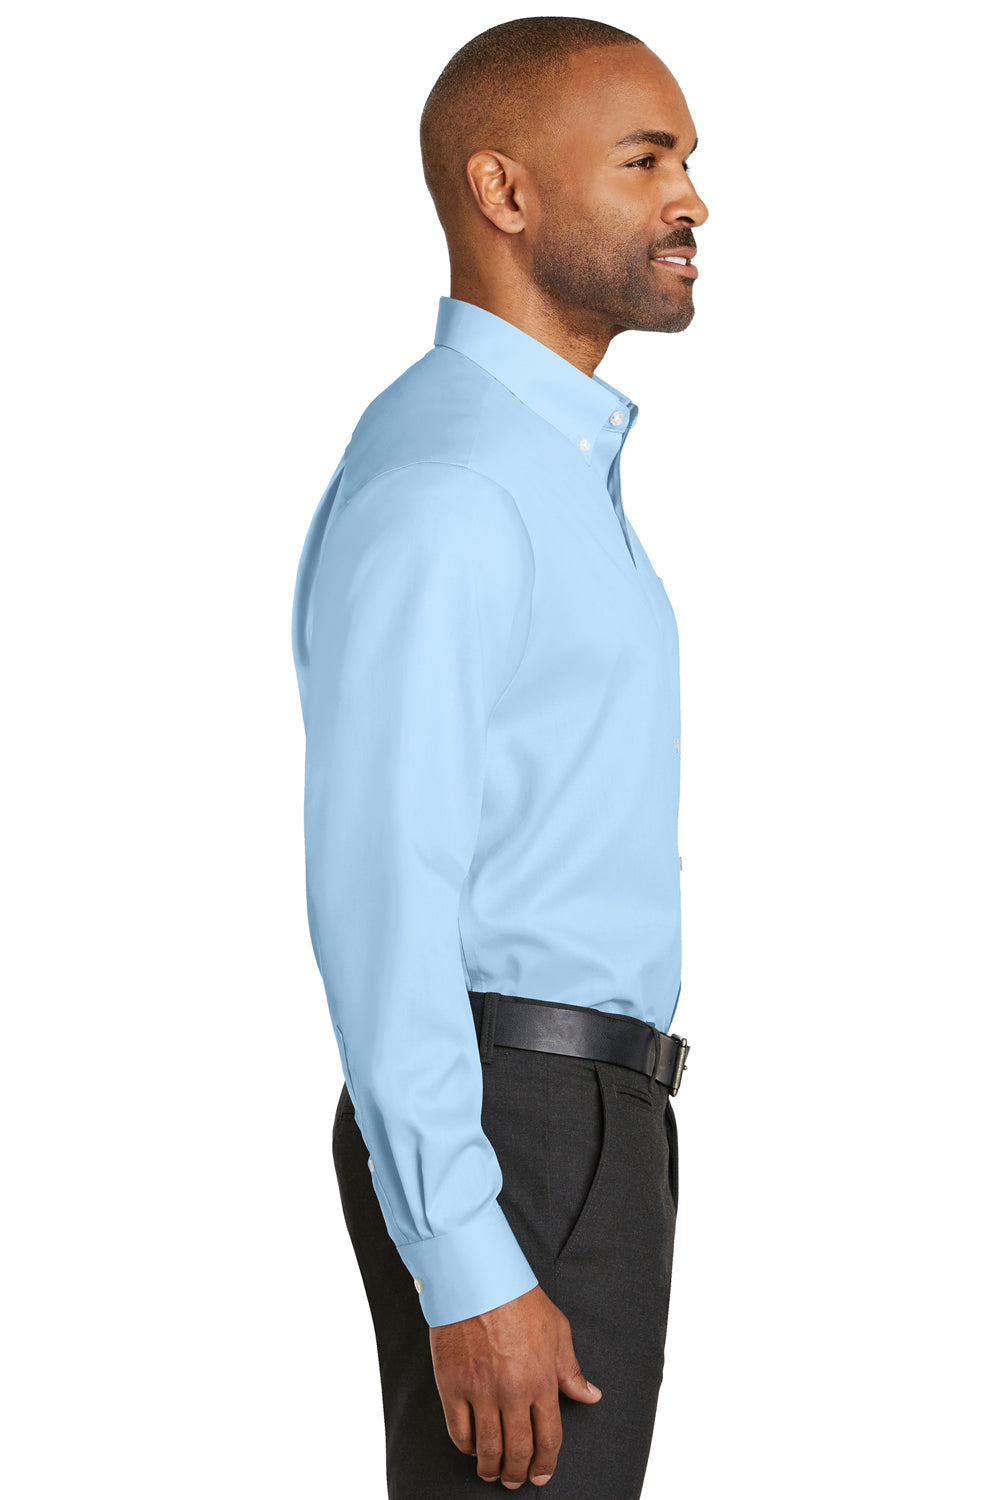 Red House RH78 Mens Wrinkle Resistant Long Sleeve Button Down Shirt w/ Pocket Heritage Blue Side